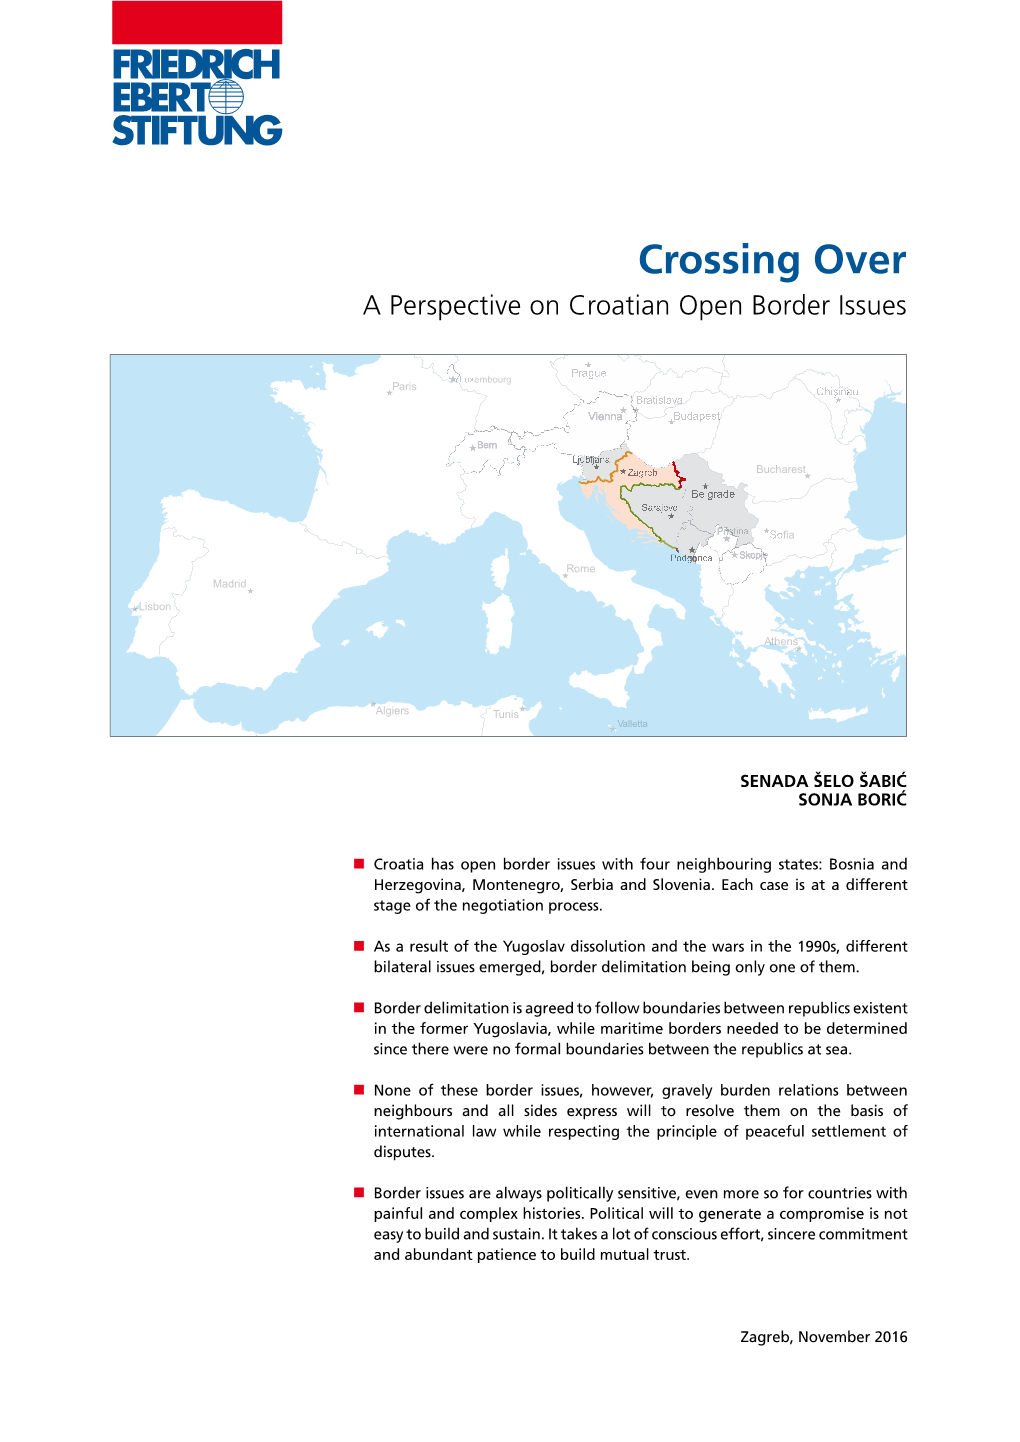 Crossing Over a Perspective on Croatian Open Border Issues